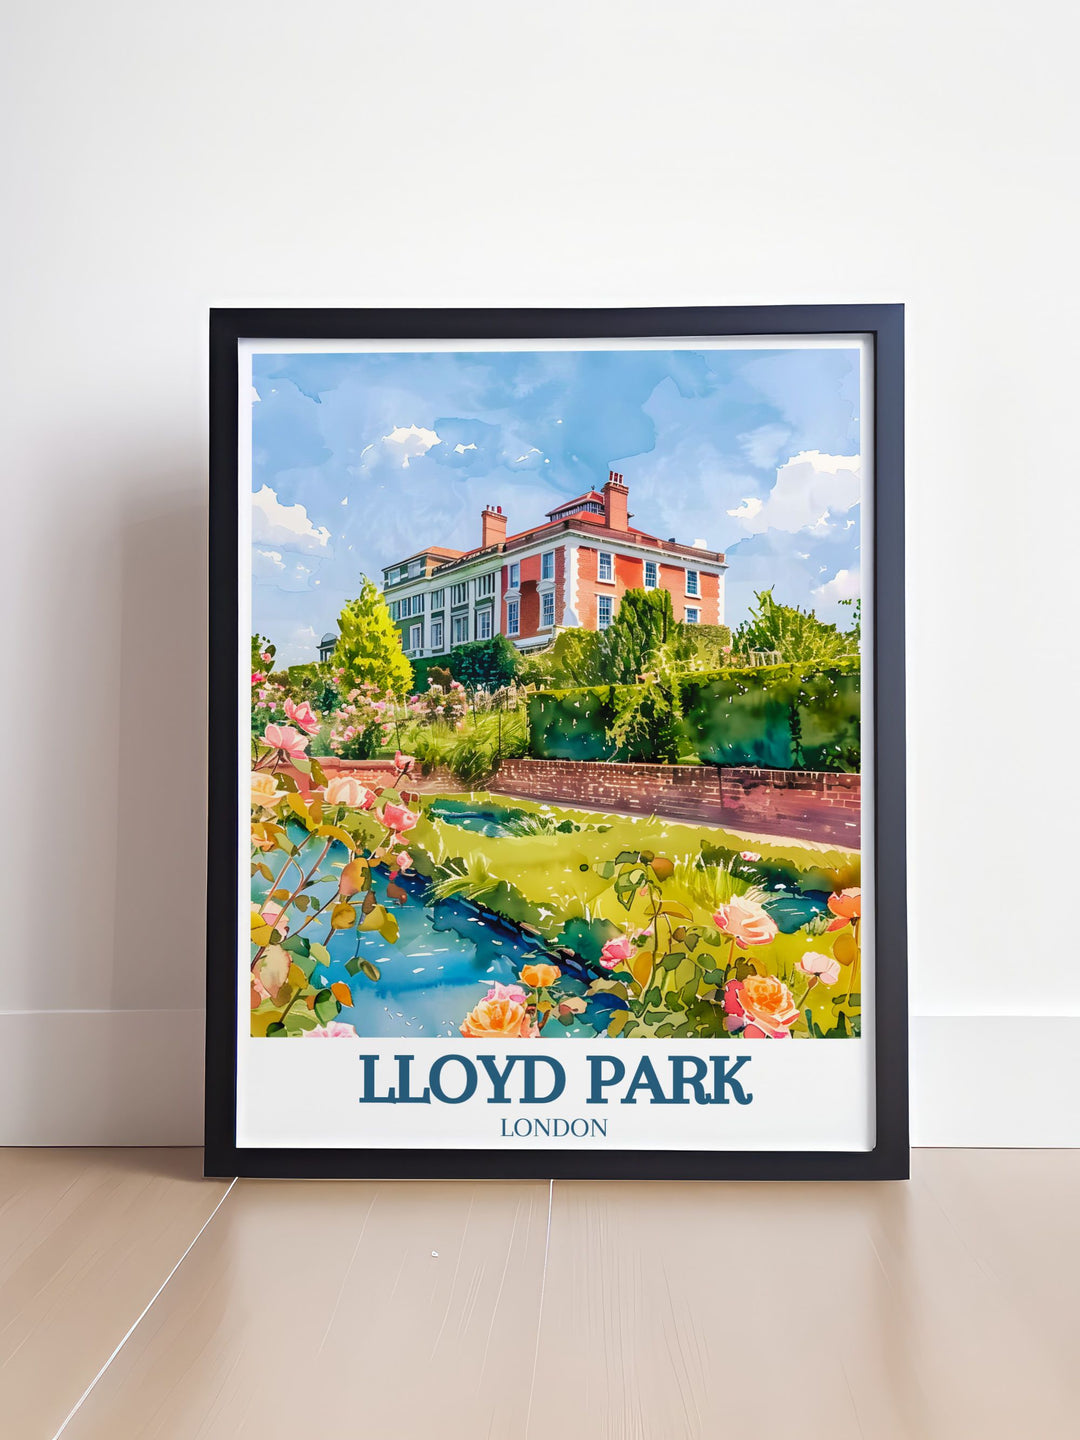 East London print showcasing the beautiful rose garden at the William Morris gallery in Lloyd Park. A captivating addition to any home decor. Ideal for those who appreciate historical and nature inspired art.